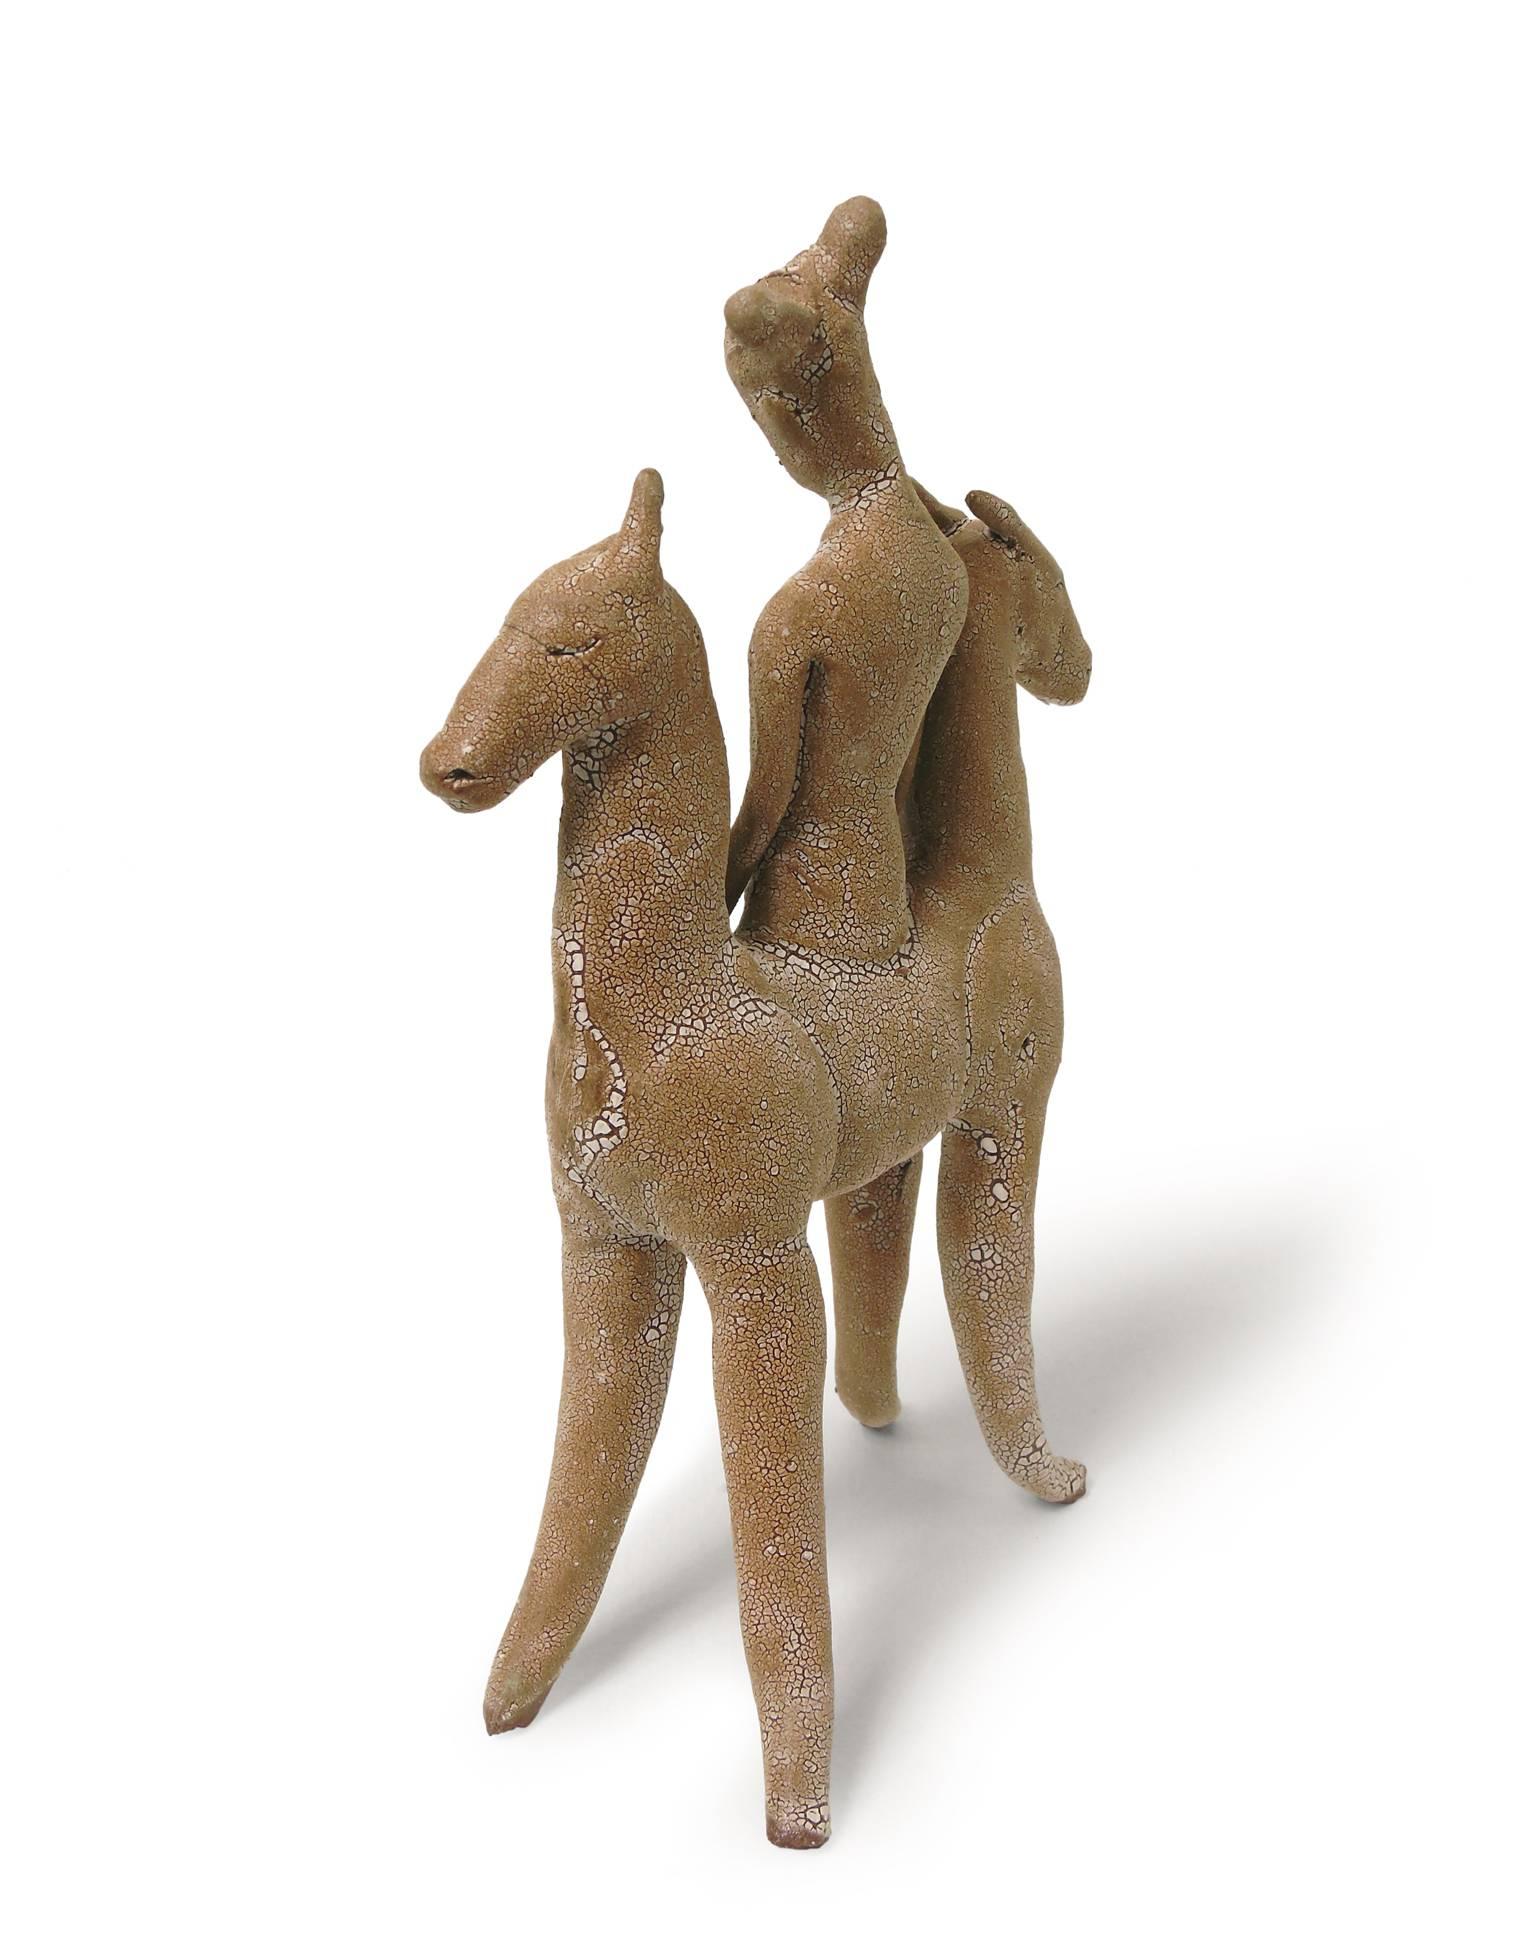 This version of Robin Whiteman's Horse Goddess measures under 7 inches tall and features a horse with two head-ends with a female figure centered between them. It is made of terracotta with a crackled white glaze. It has the look of an aged